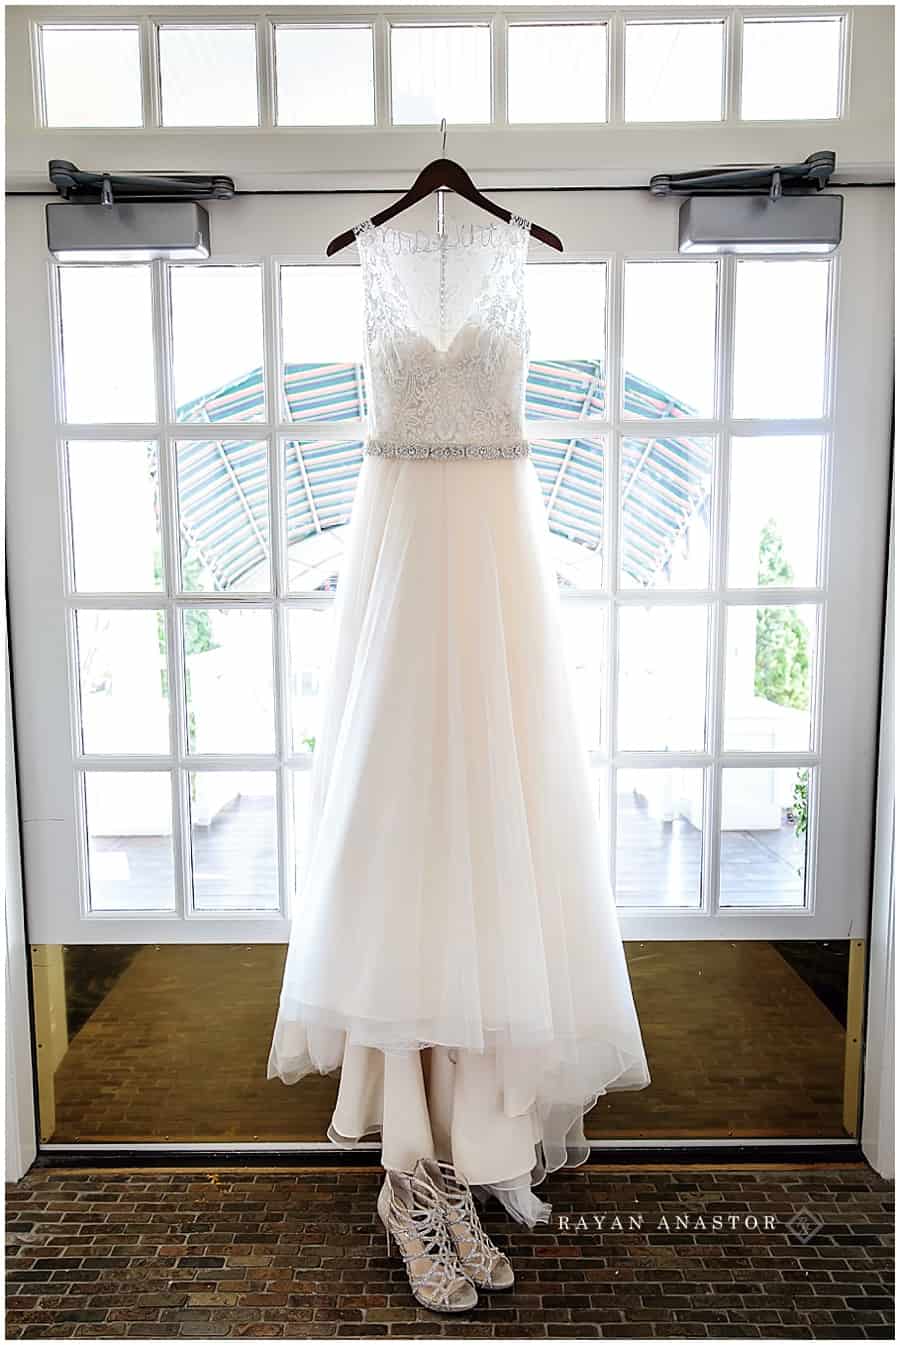 Bridal Gown at the Island House